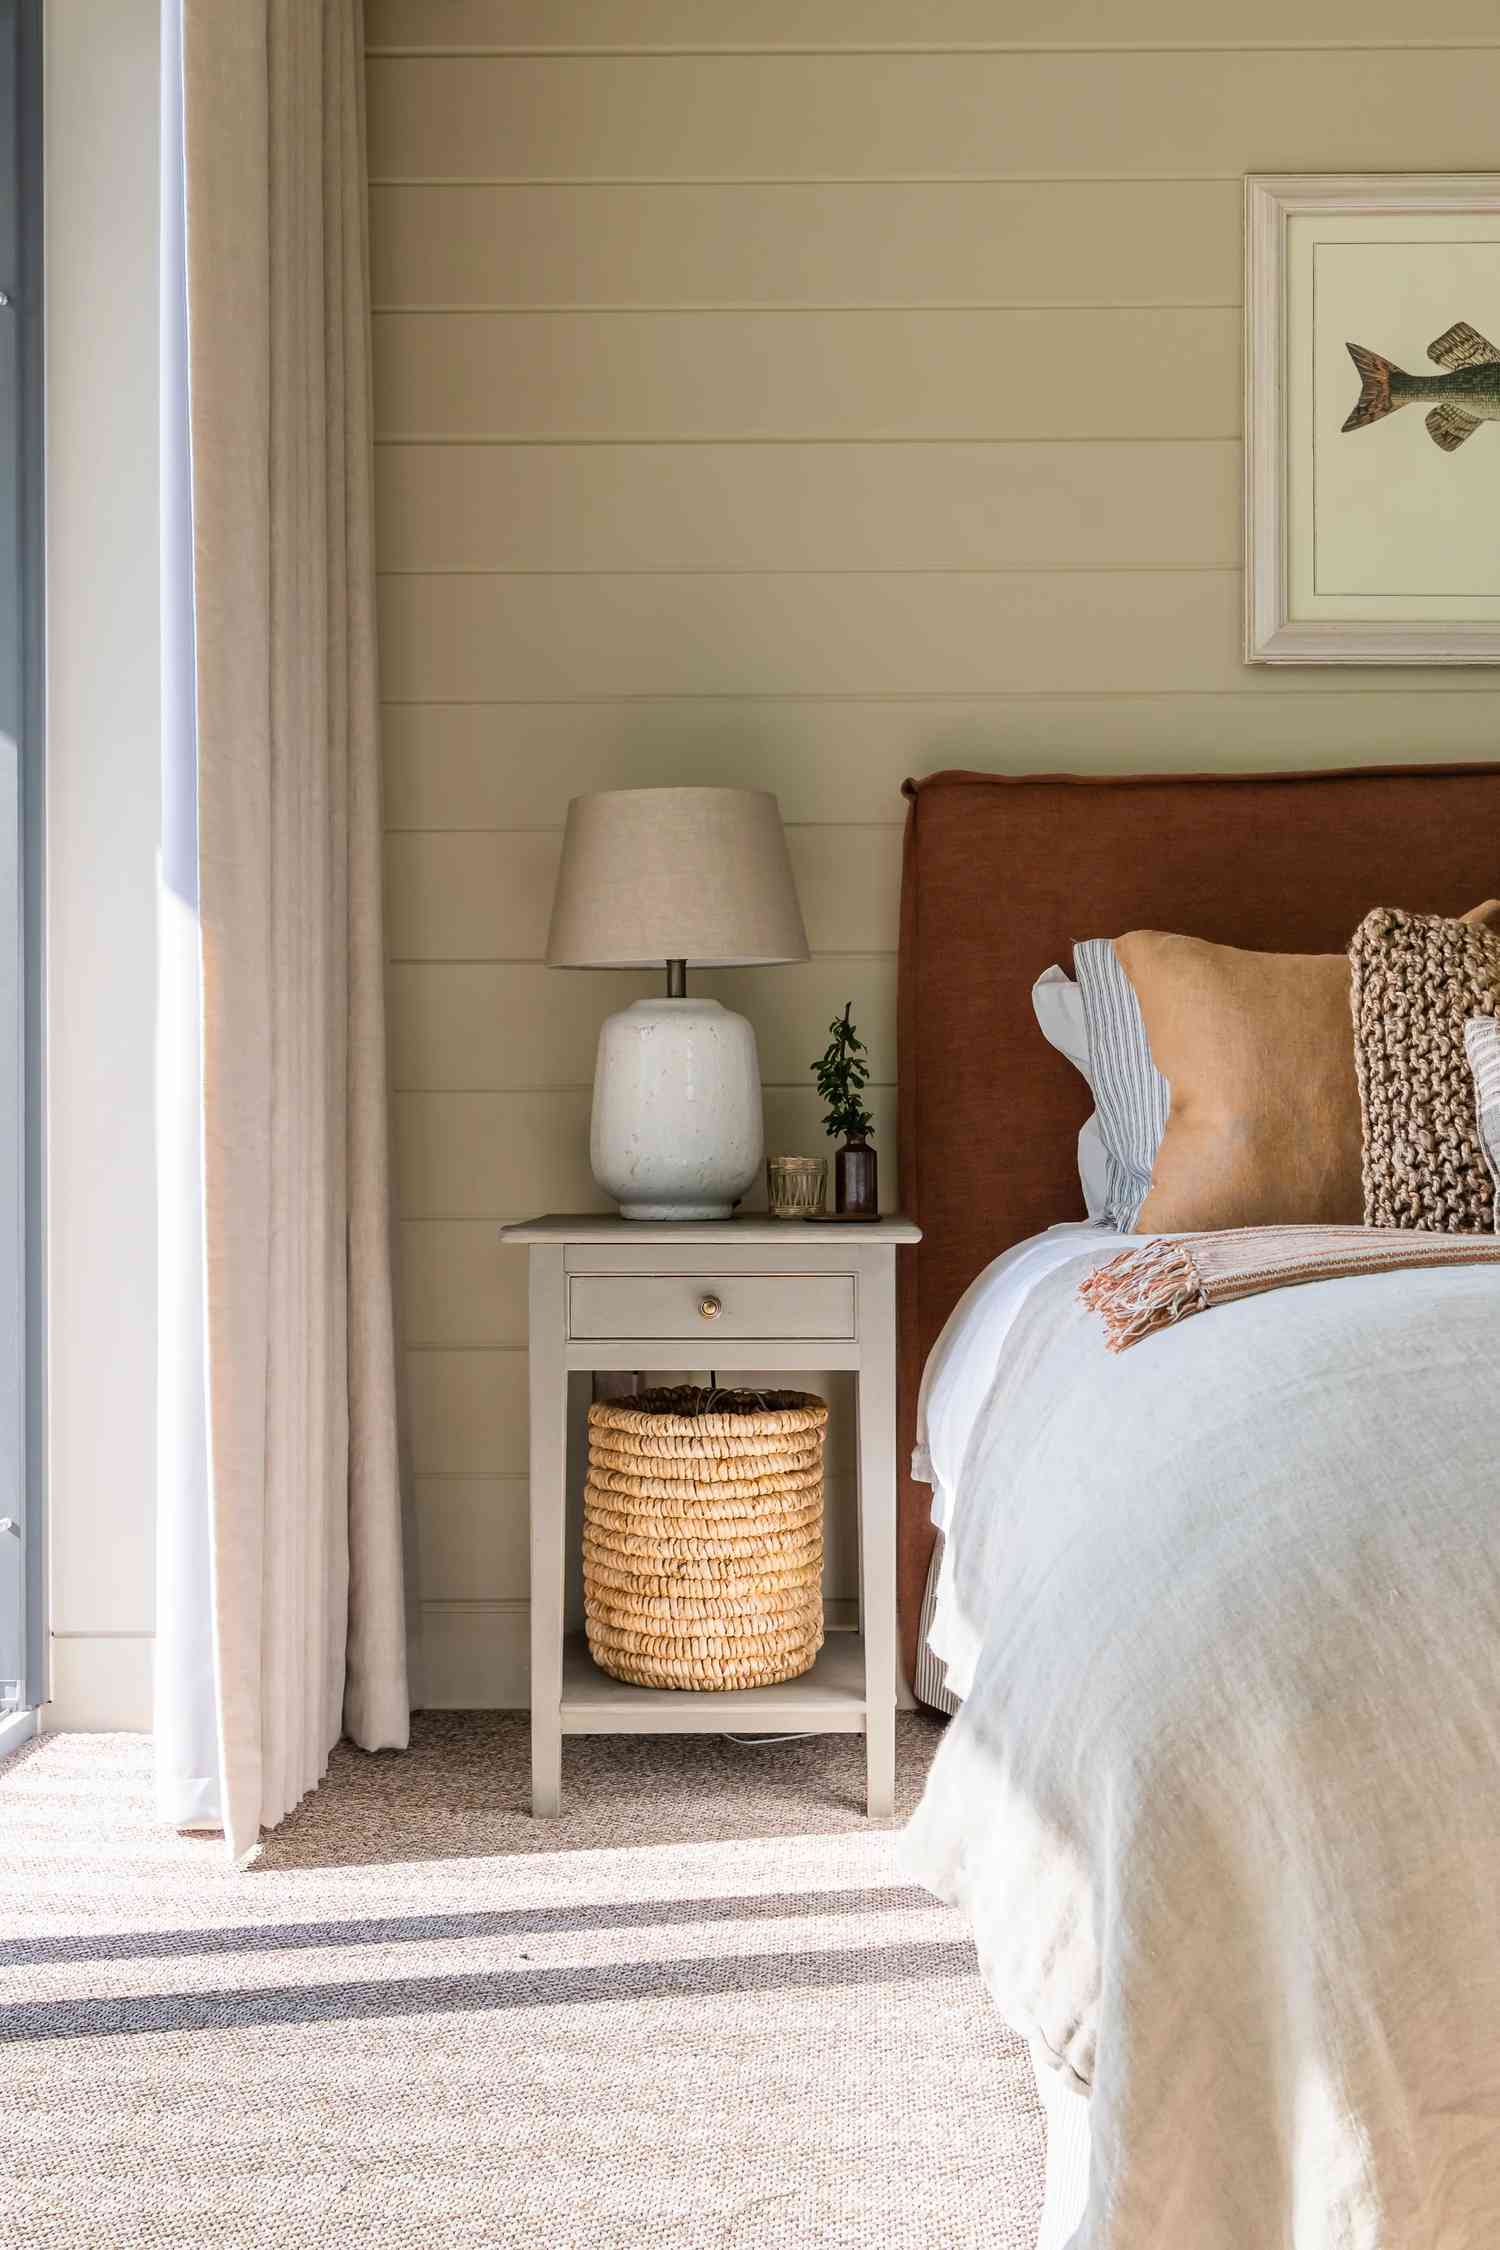 Wide horizontal shiplap painted in a light beige color behind a headboard